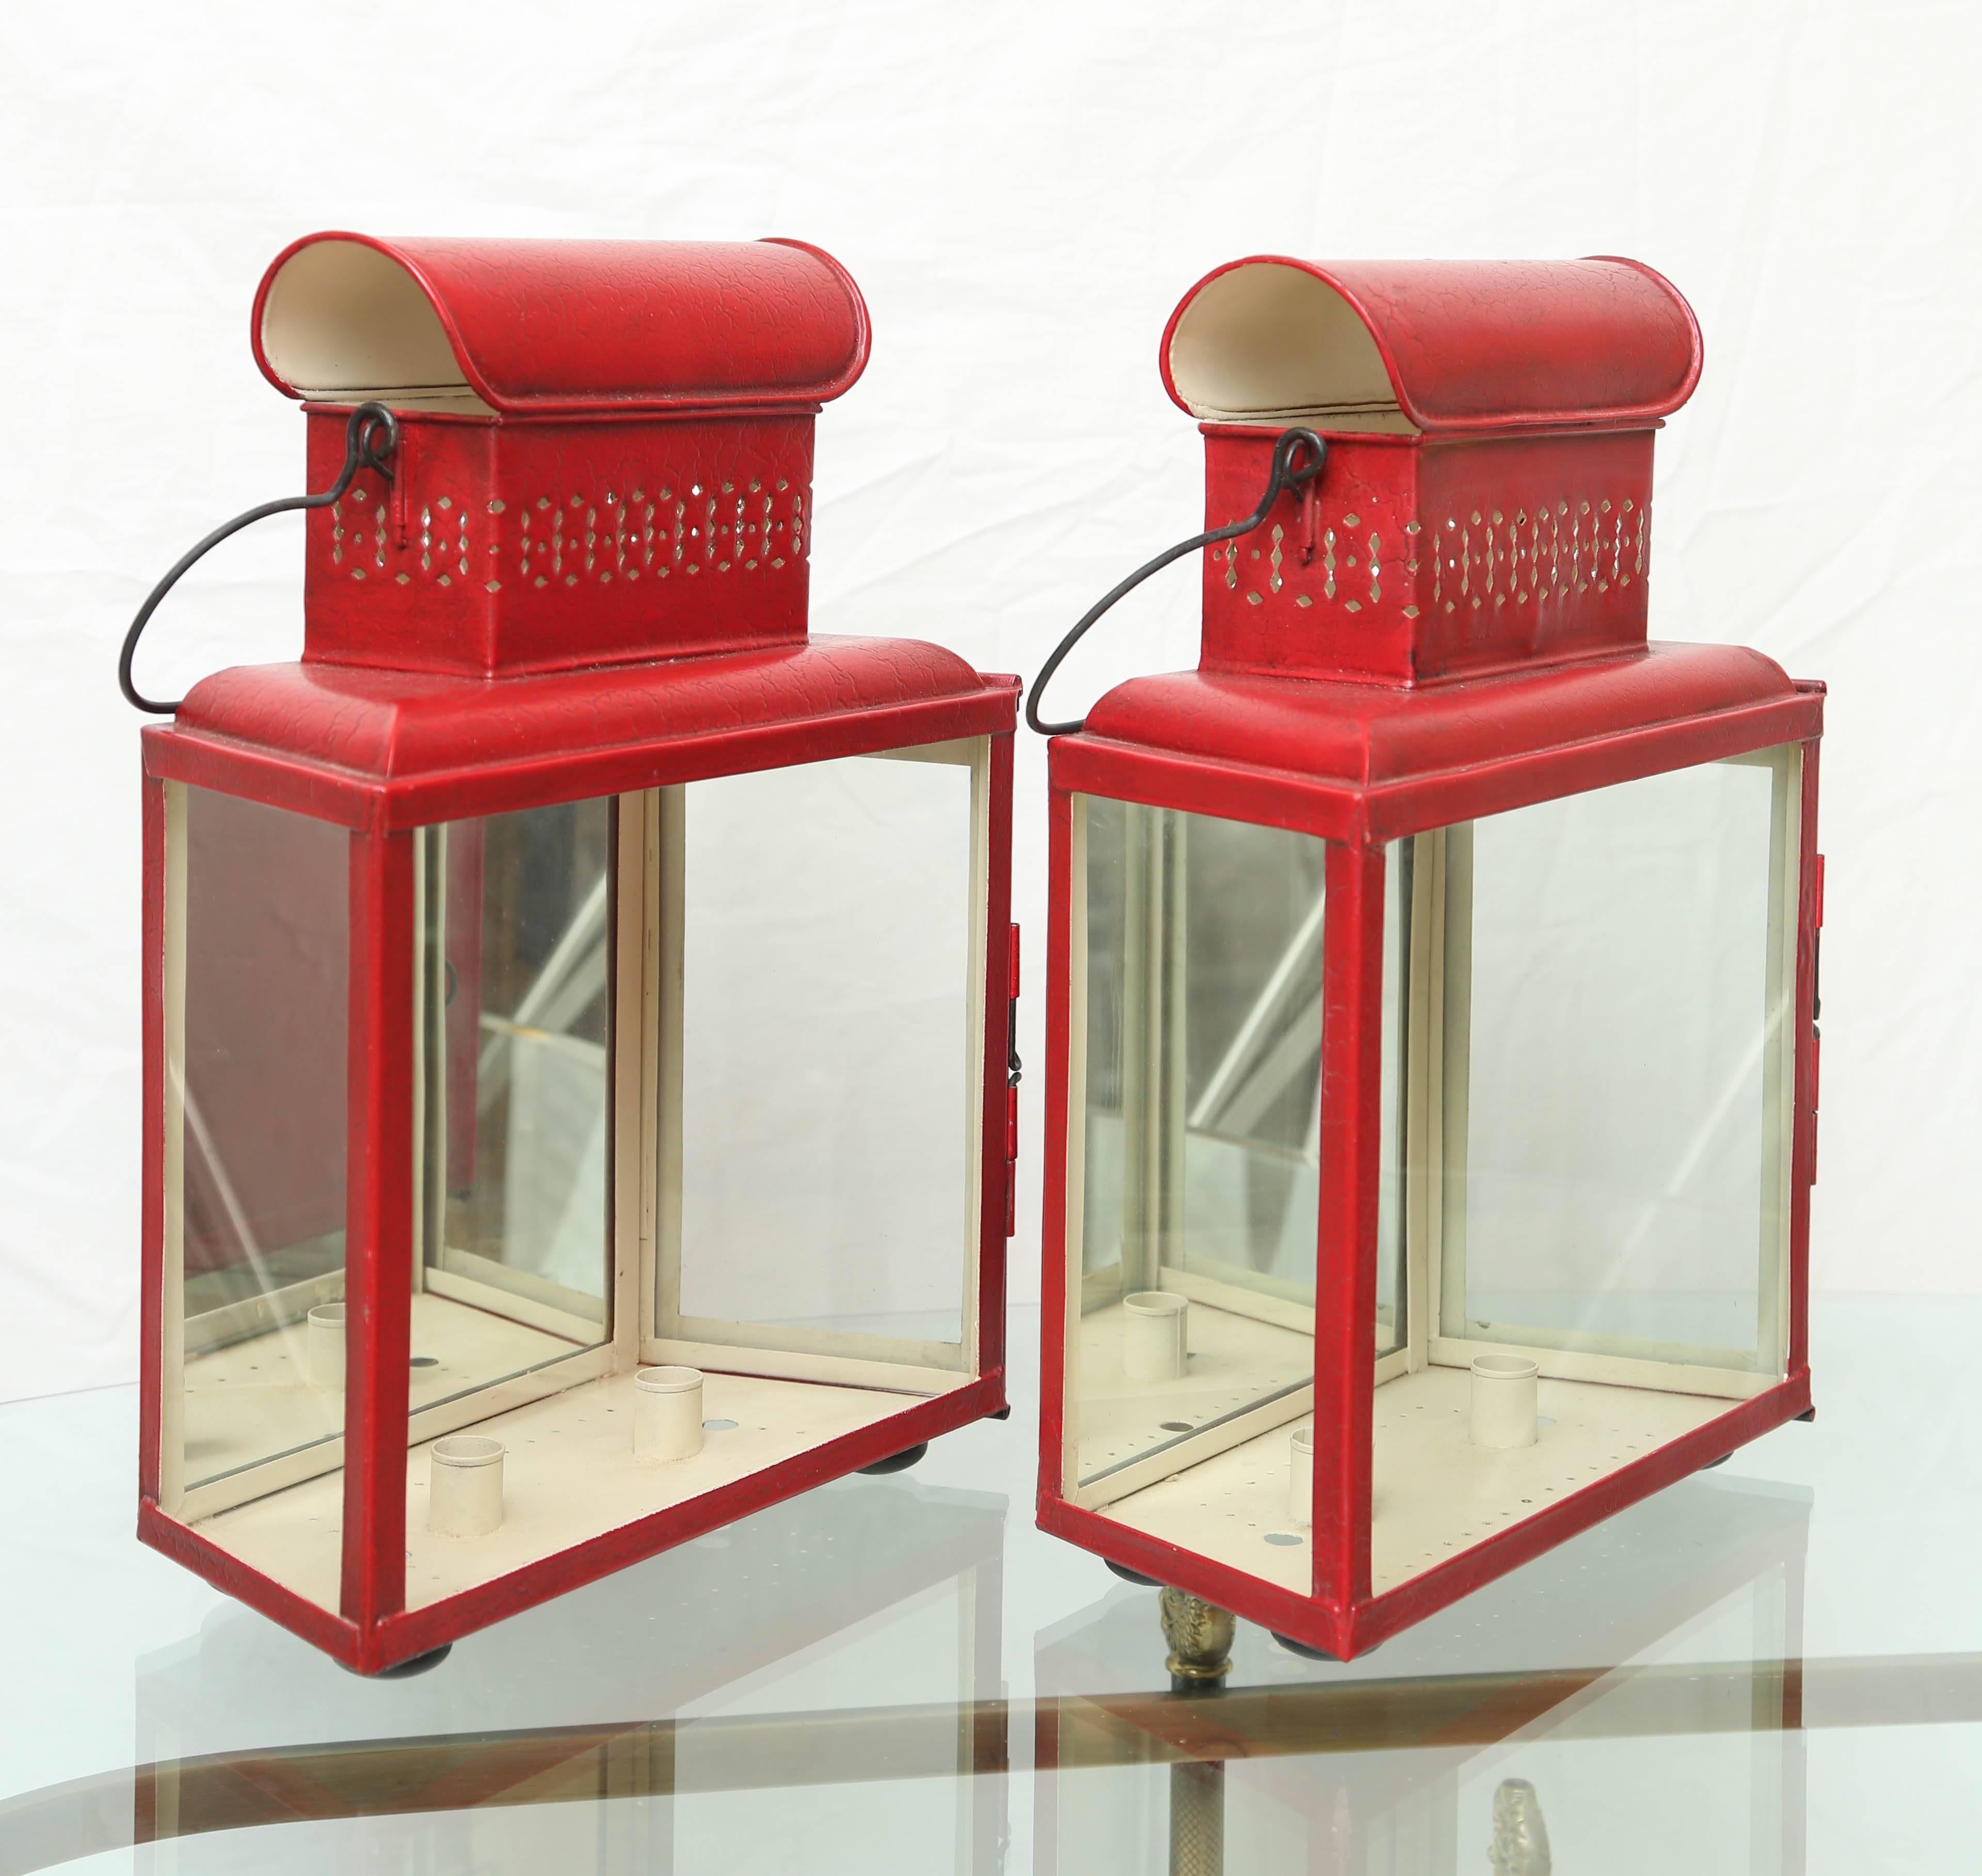 Striking pair of red metal lanterns with mirrored backs. Can sit on table or hang on wall. Non-electrified.